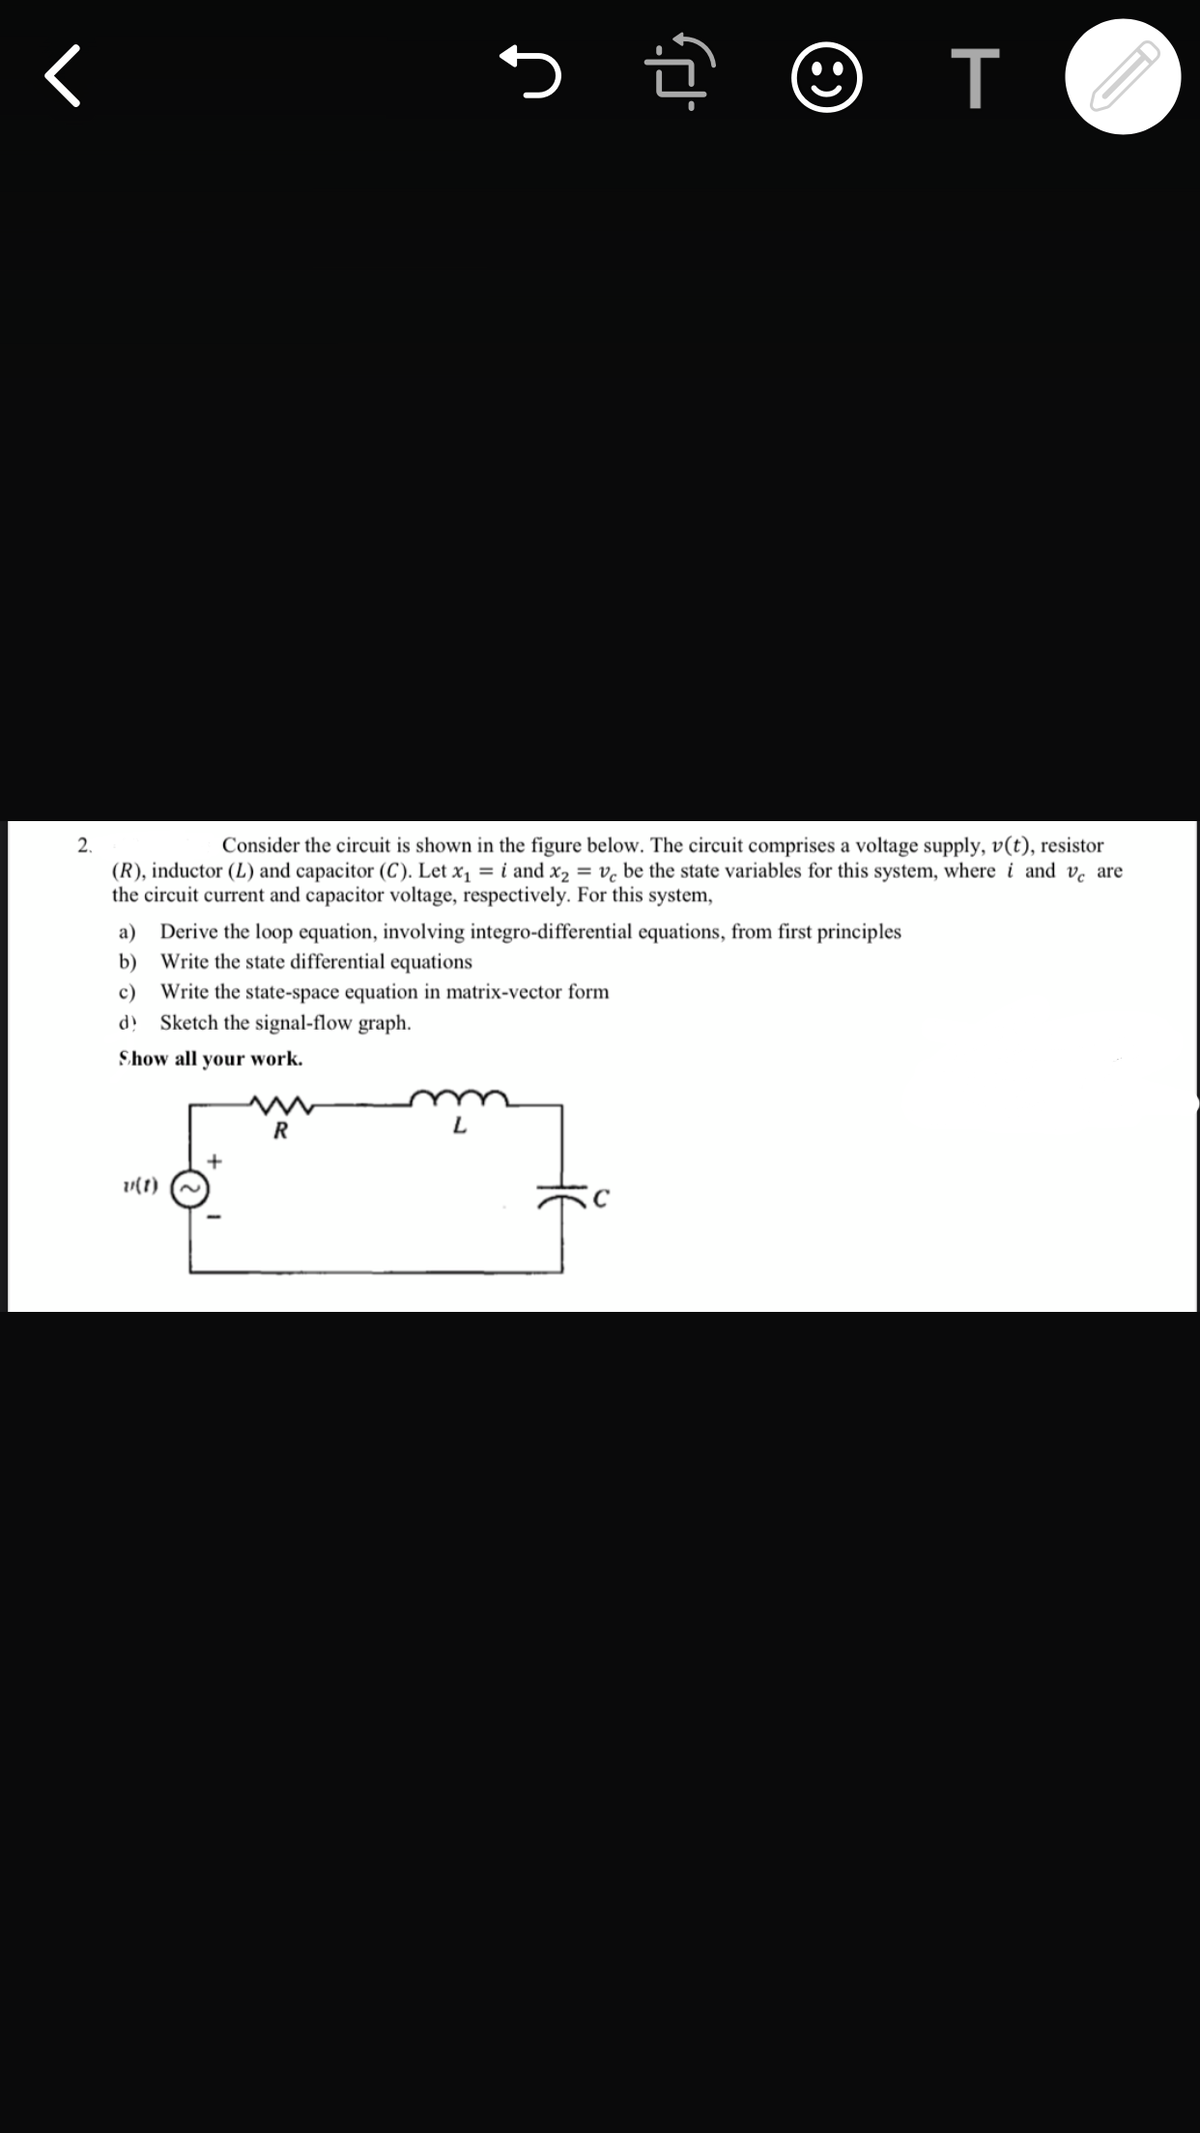 т
2.
Consider the circuit is shown in the figure below. The circuit comprises a voltage supply, v(t), resistor
(R), inductor (L) and capacitor (C). Let x1 = i and x2 = v. be the state variables for this system, where i and ve are
the circuit current and capacitor voltage, respectively. For this system,
a) Derive the loop equation, involving integro-differential equations, from first principles
b) Write the state differential equations
Write the state-space equation in matrix-vector form
Sketch the signal-flow graph.
c)
Show all your work.
L
v(1)
